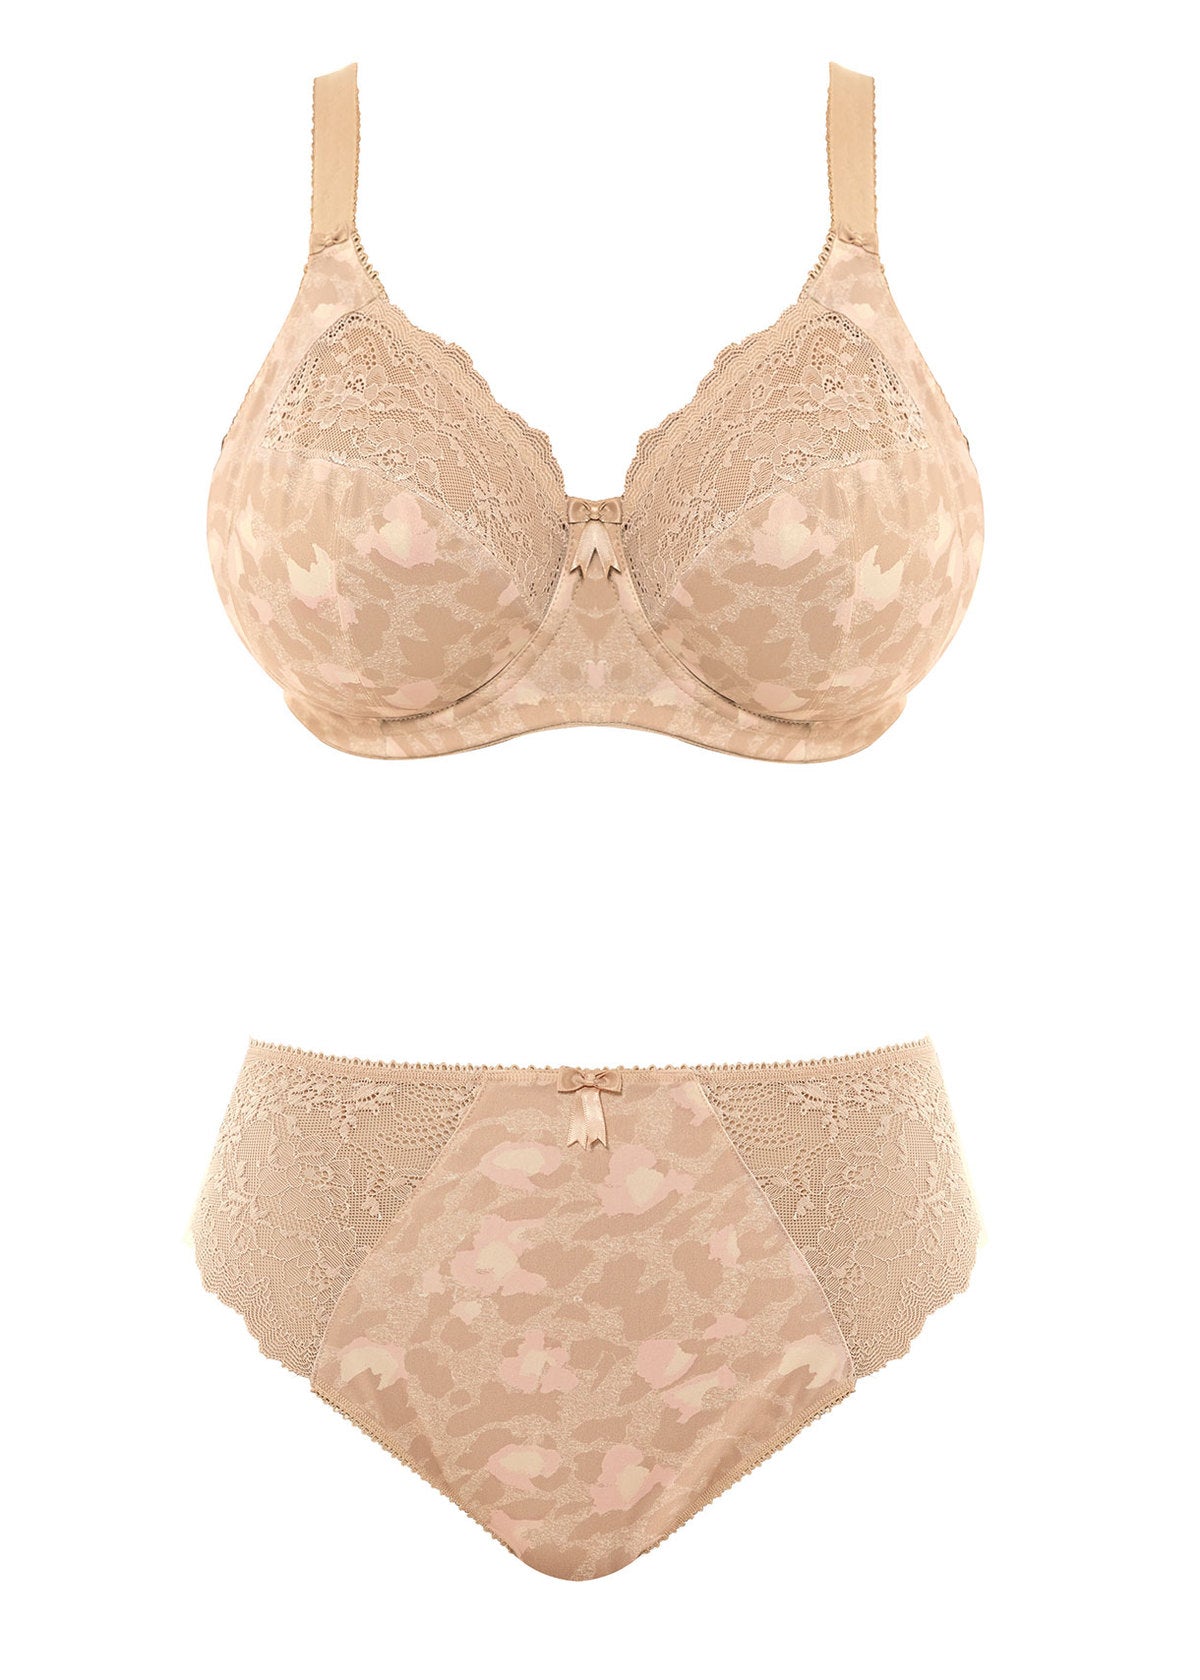 Morgan Stretch Banded Bra - Toasted Almond